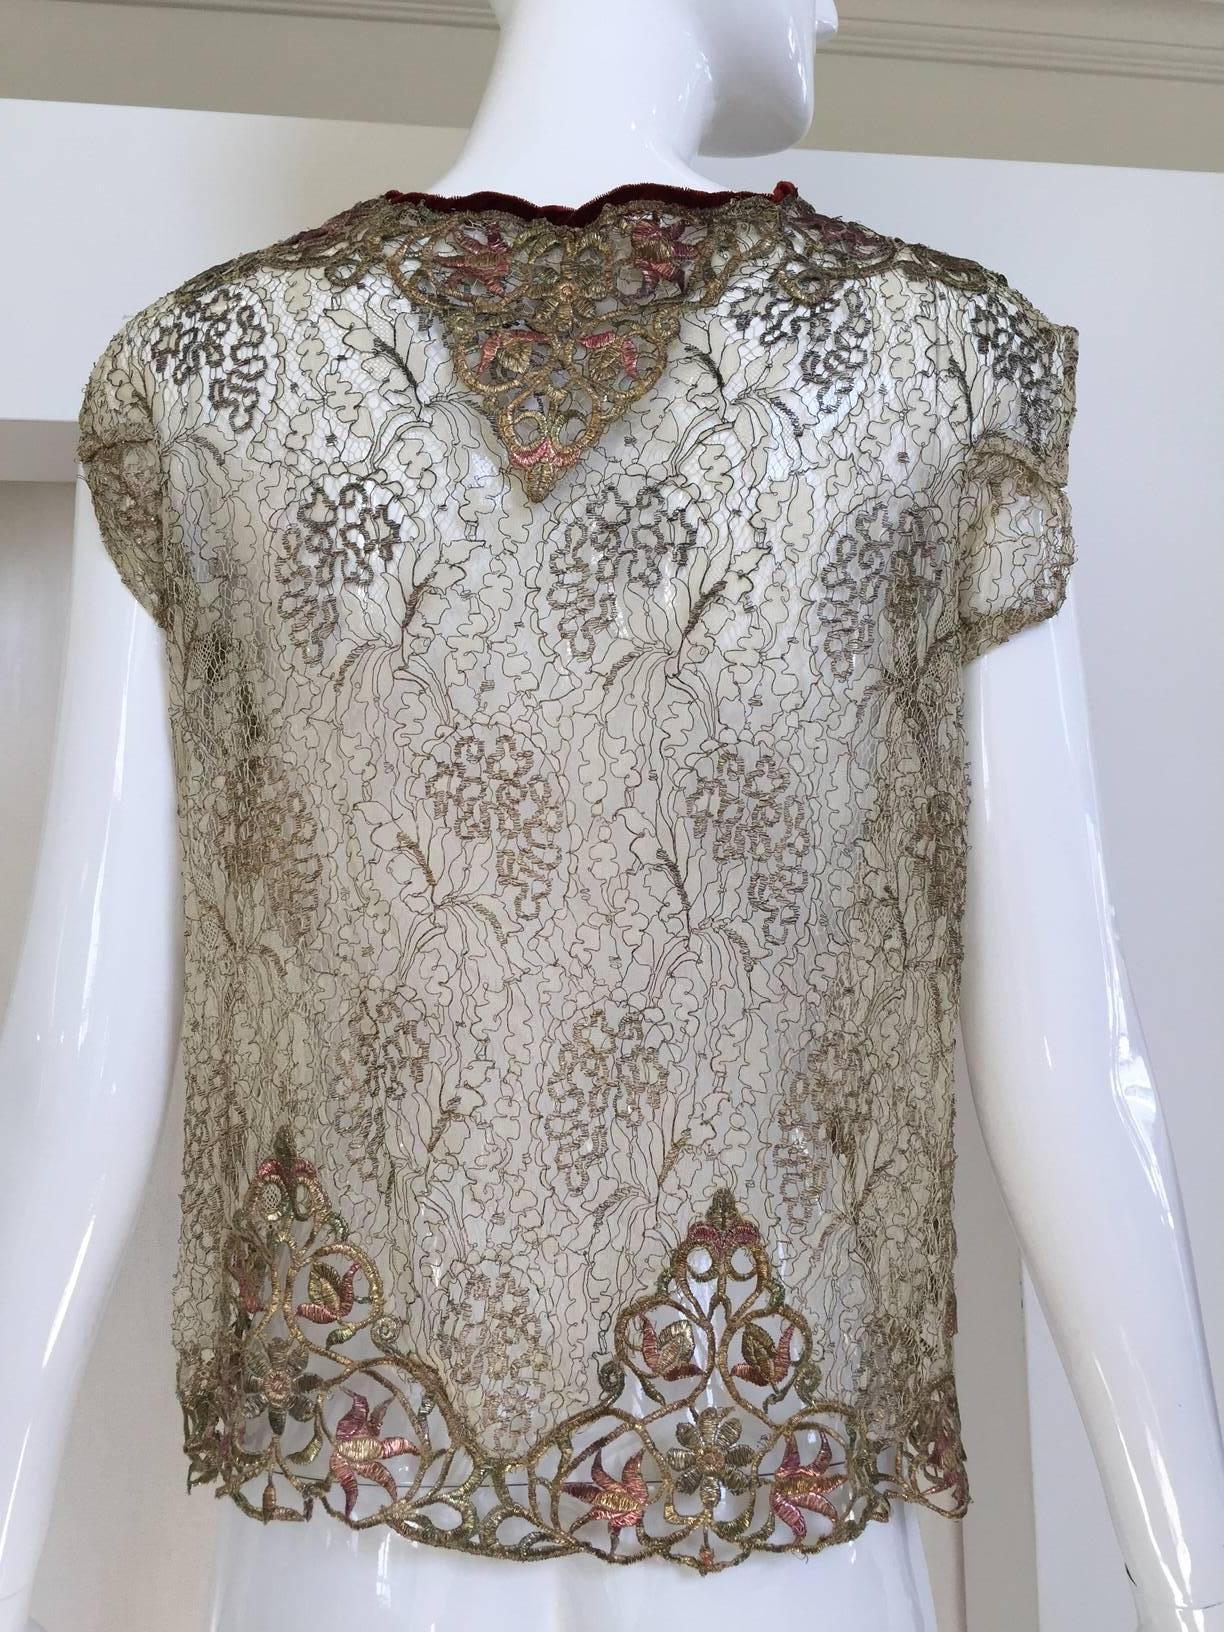 1920s gold embroidered lace blouse.
Bust: 34